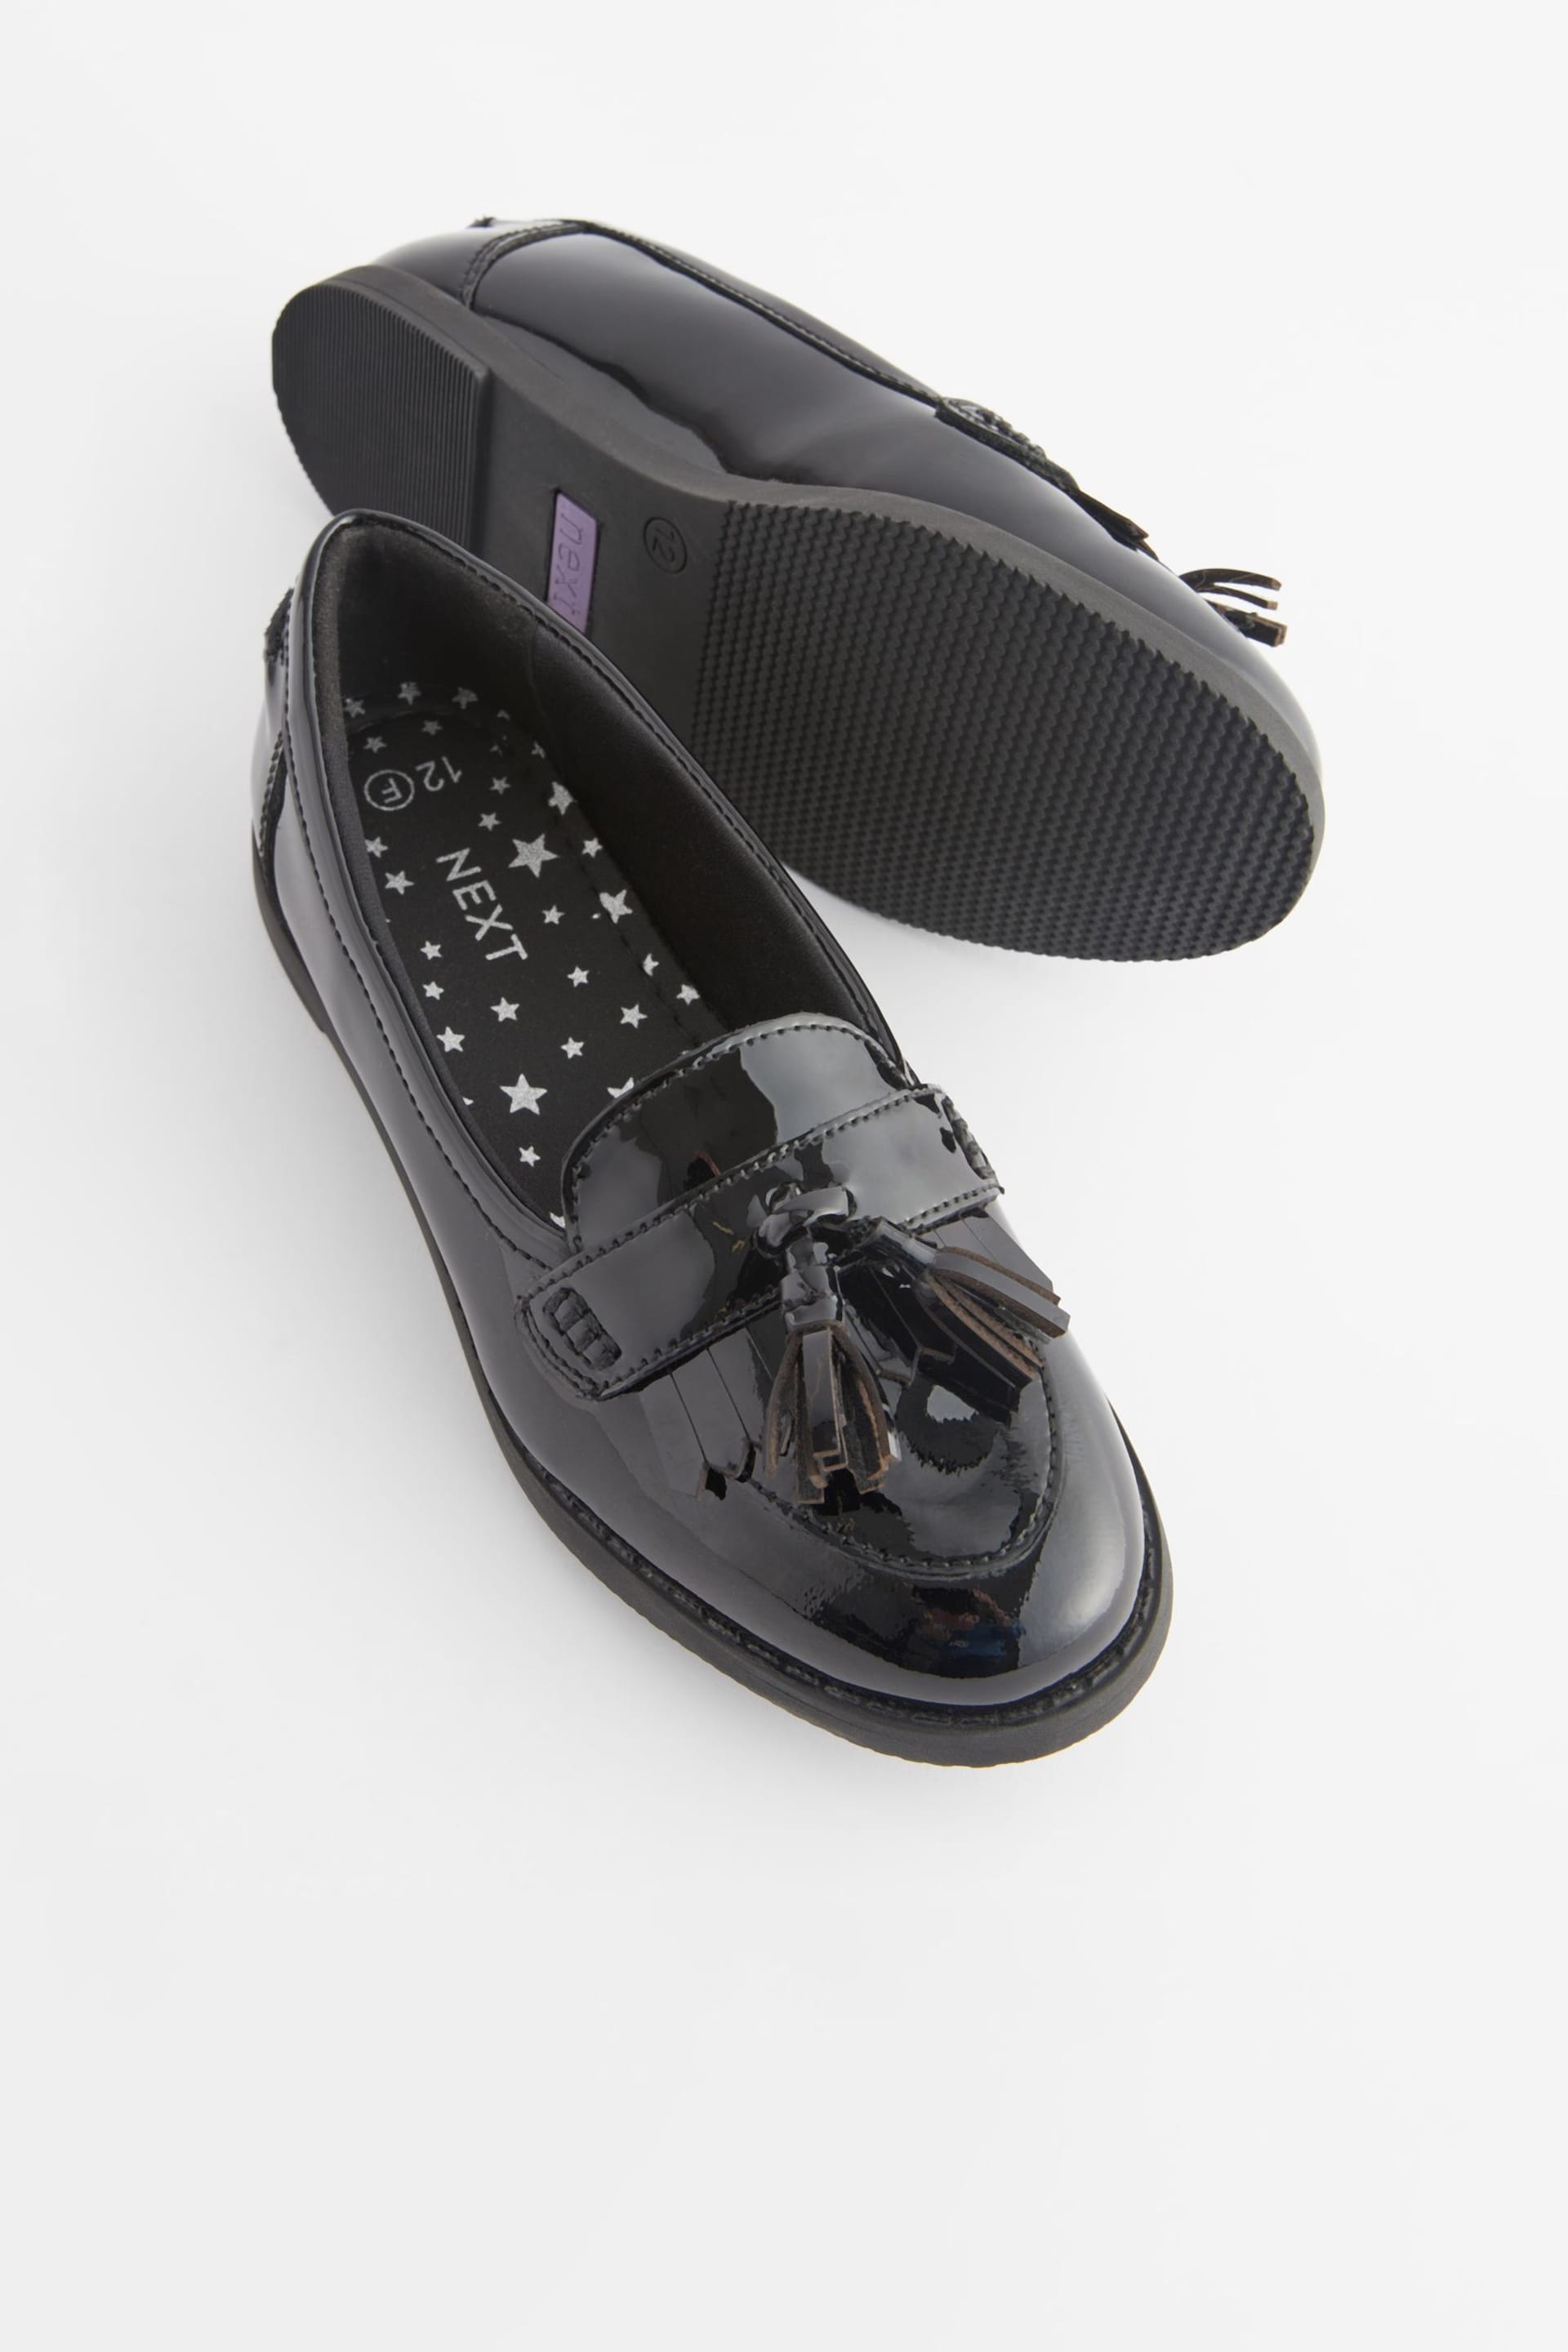 Black Patent Narrow Fit (E) School Leather Tassel Loafers - Image 4 of 5